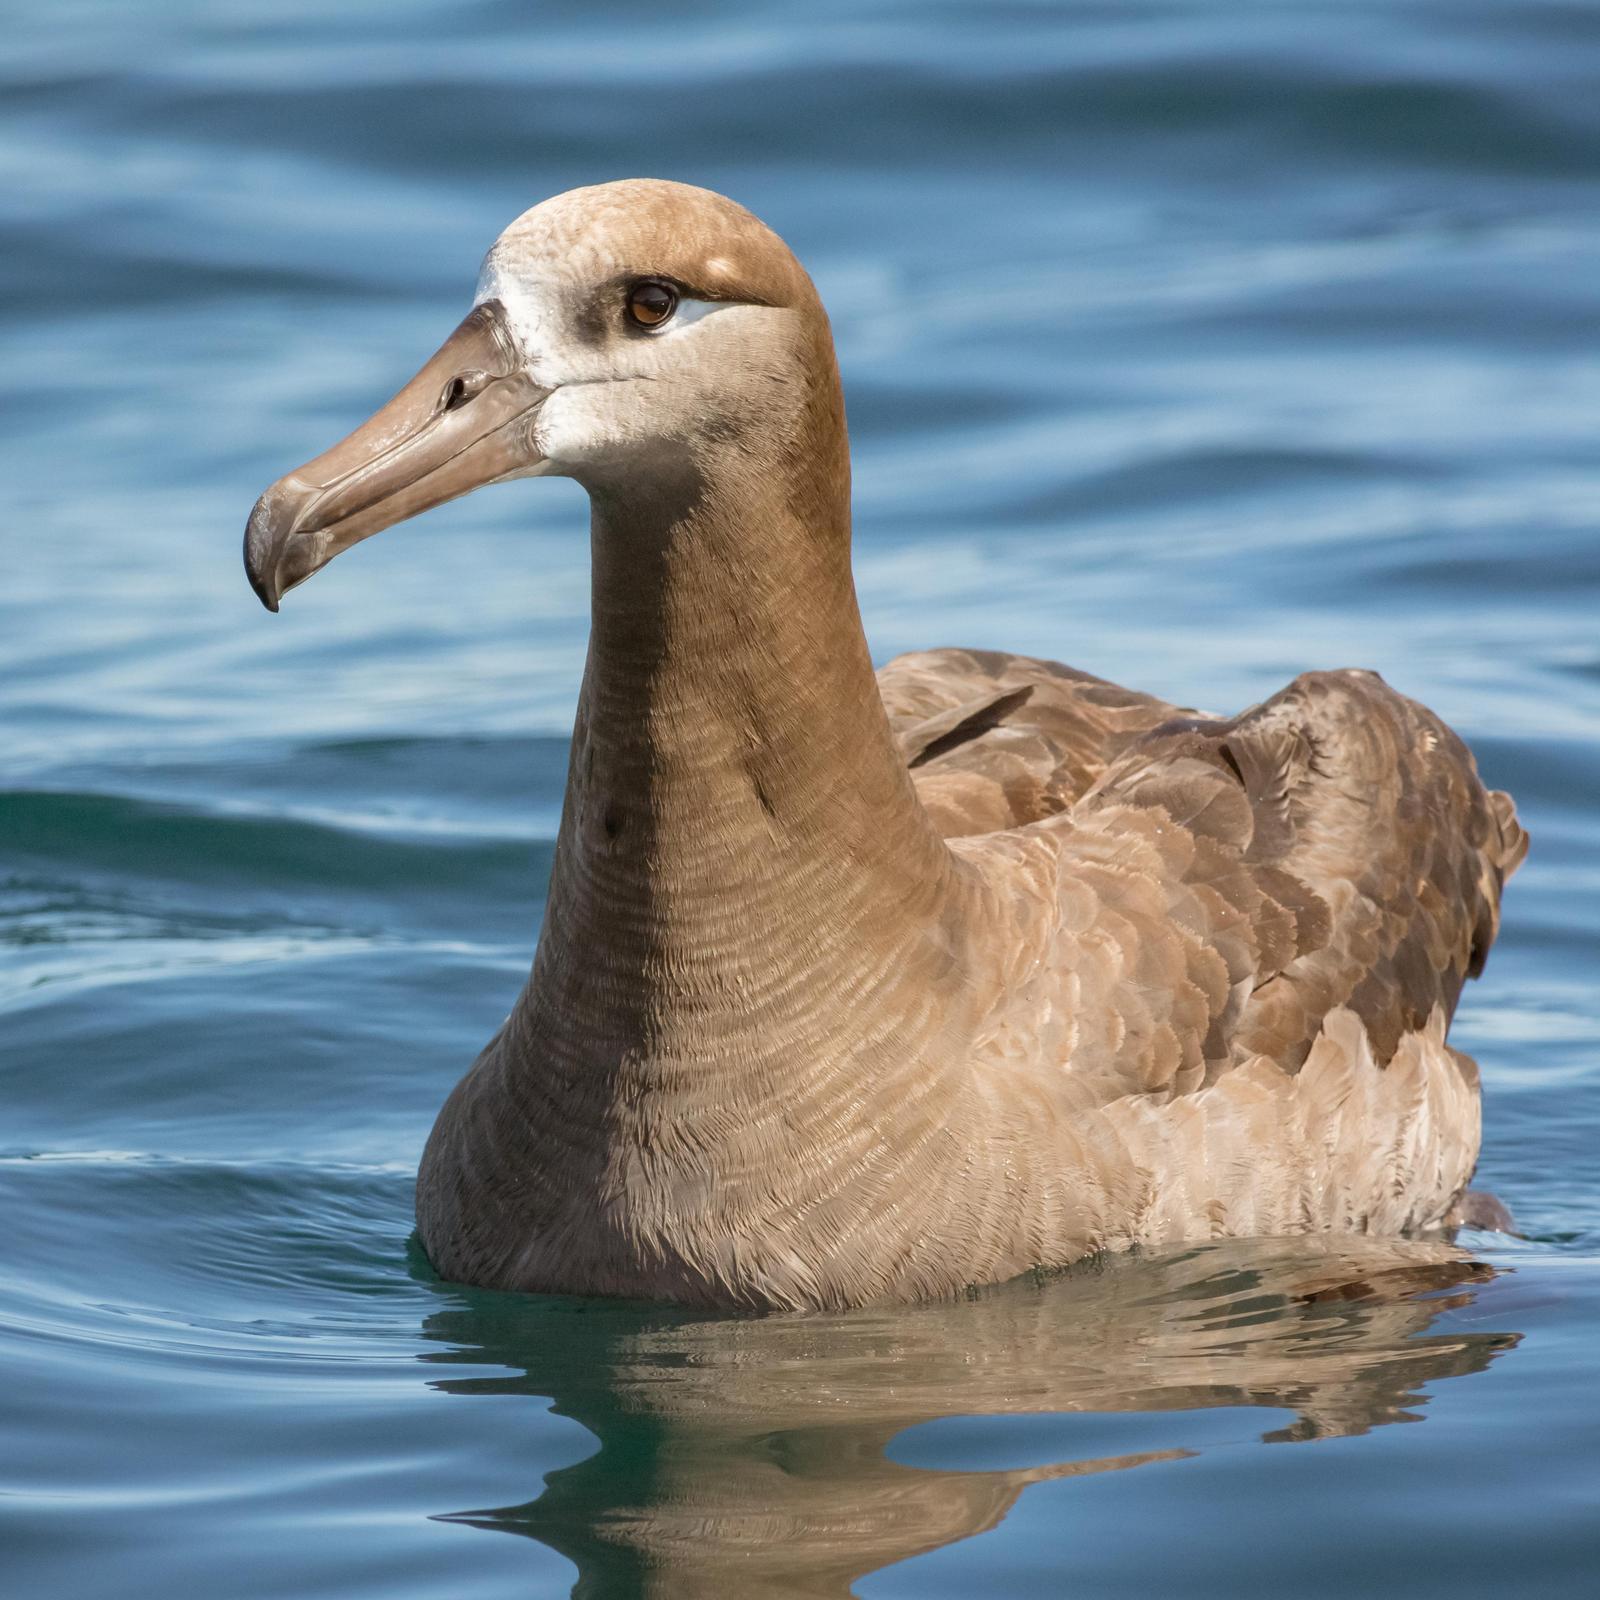 Black-footed Albatross Photo by Jesse Hodges